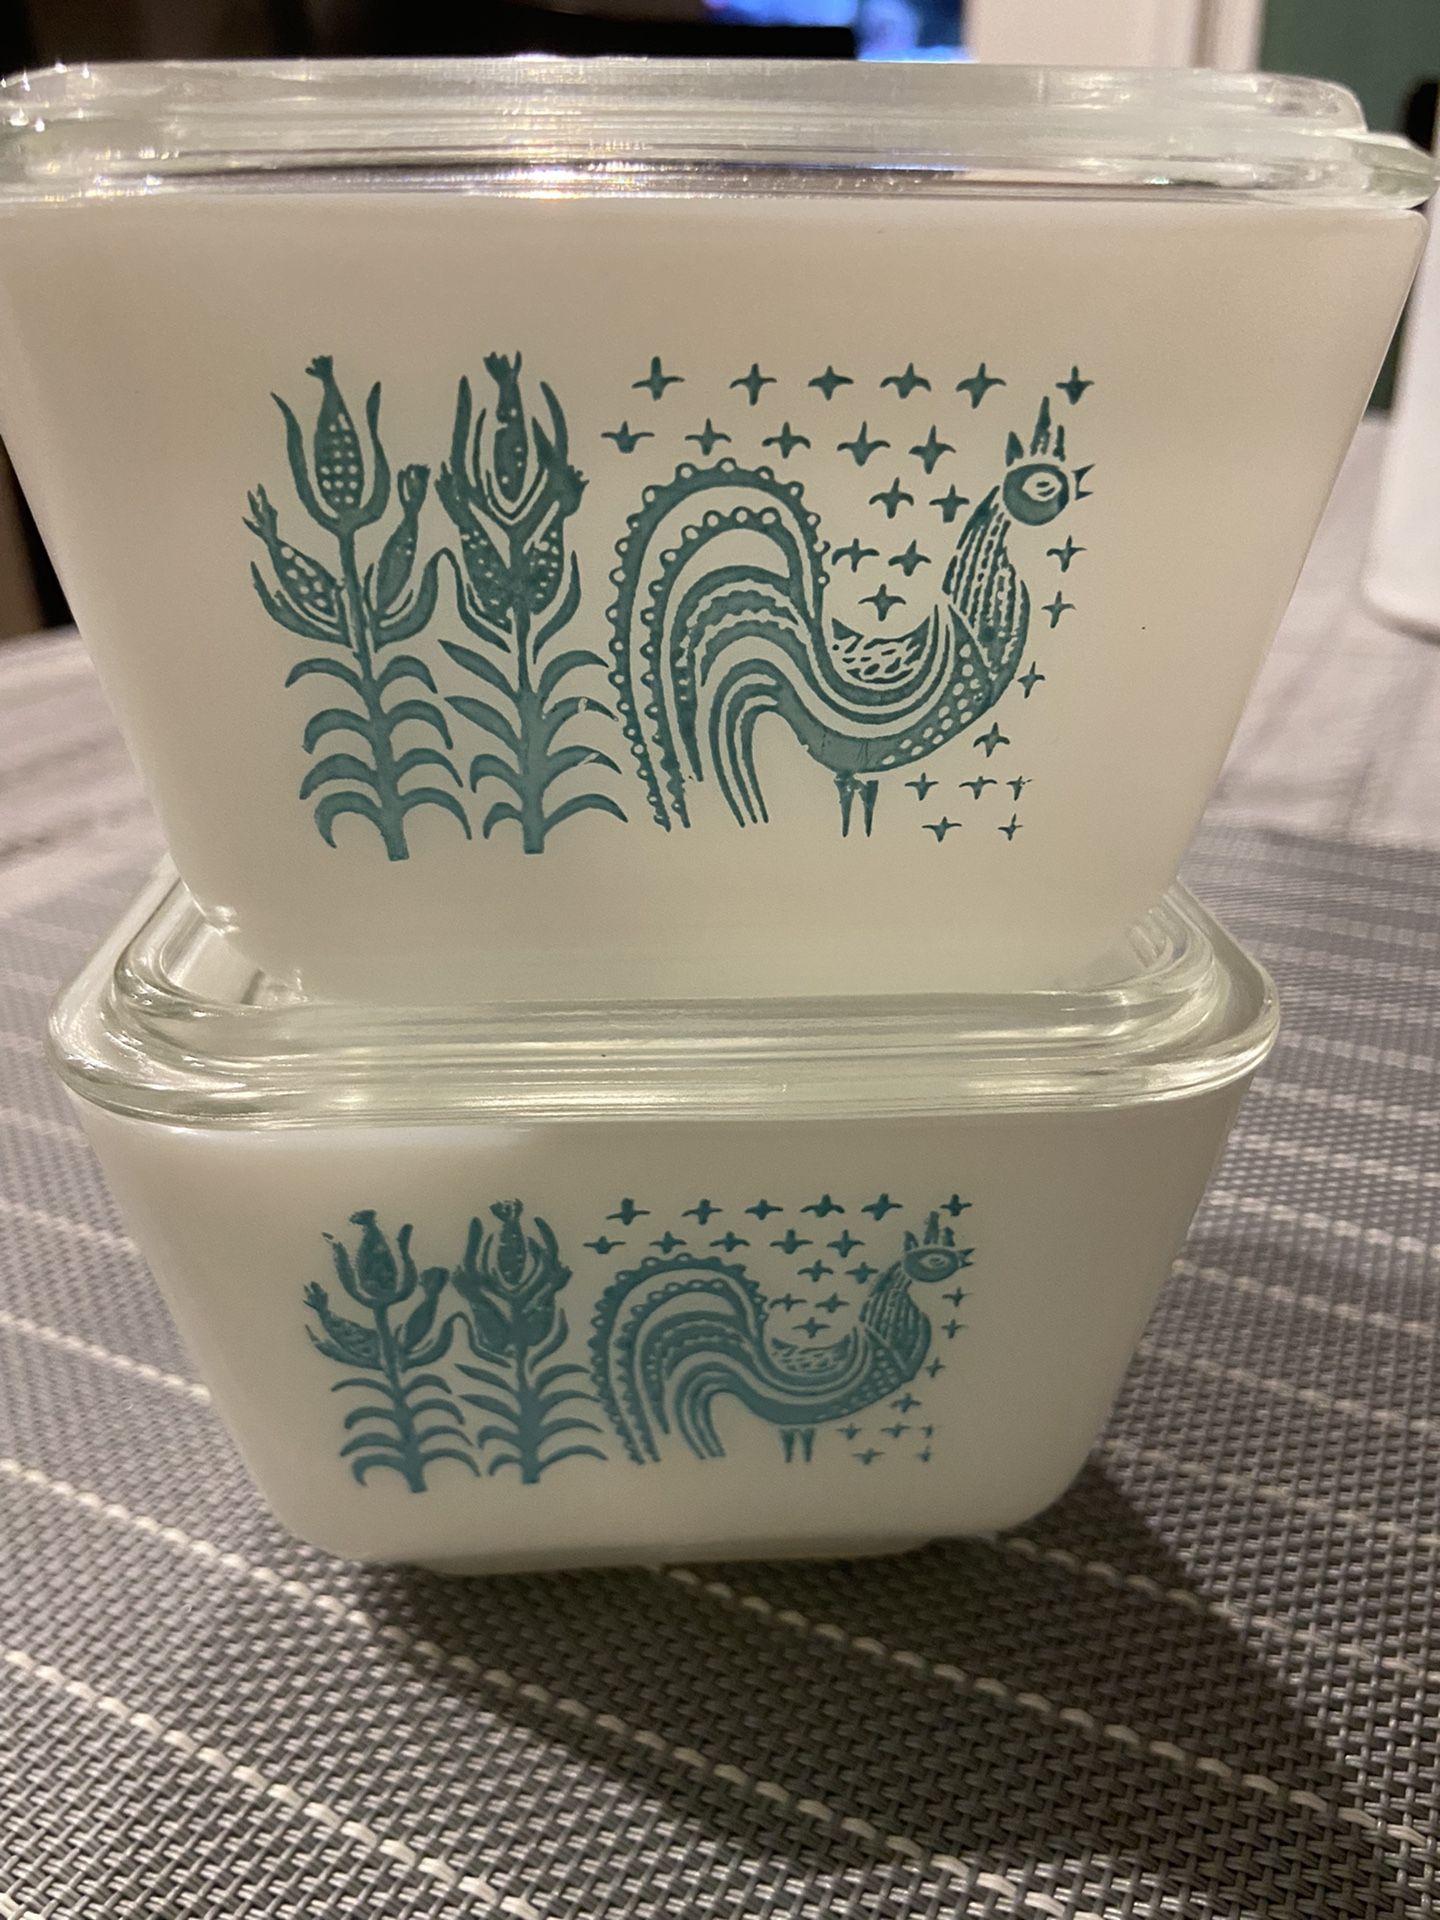 Vintage Pyrex Butterprint Amish Refrigerator Dishes With Lids